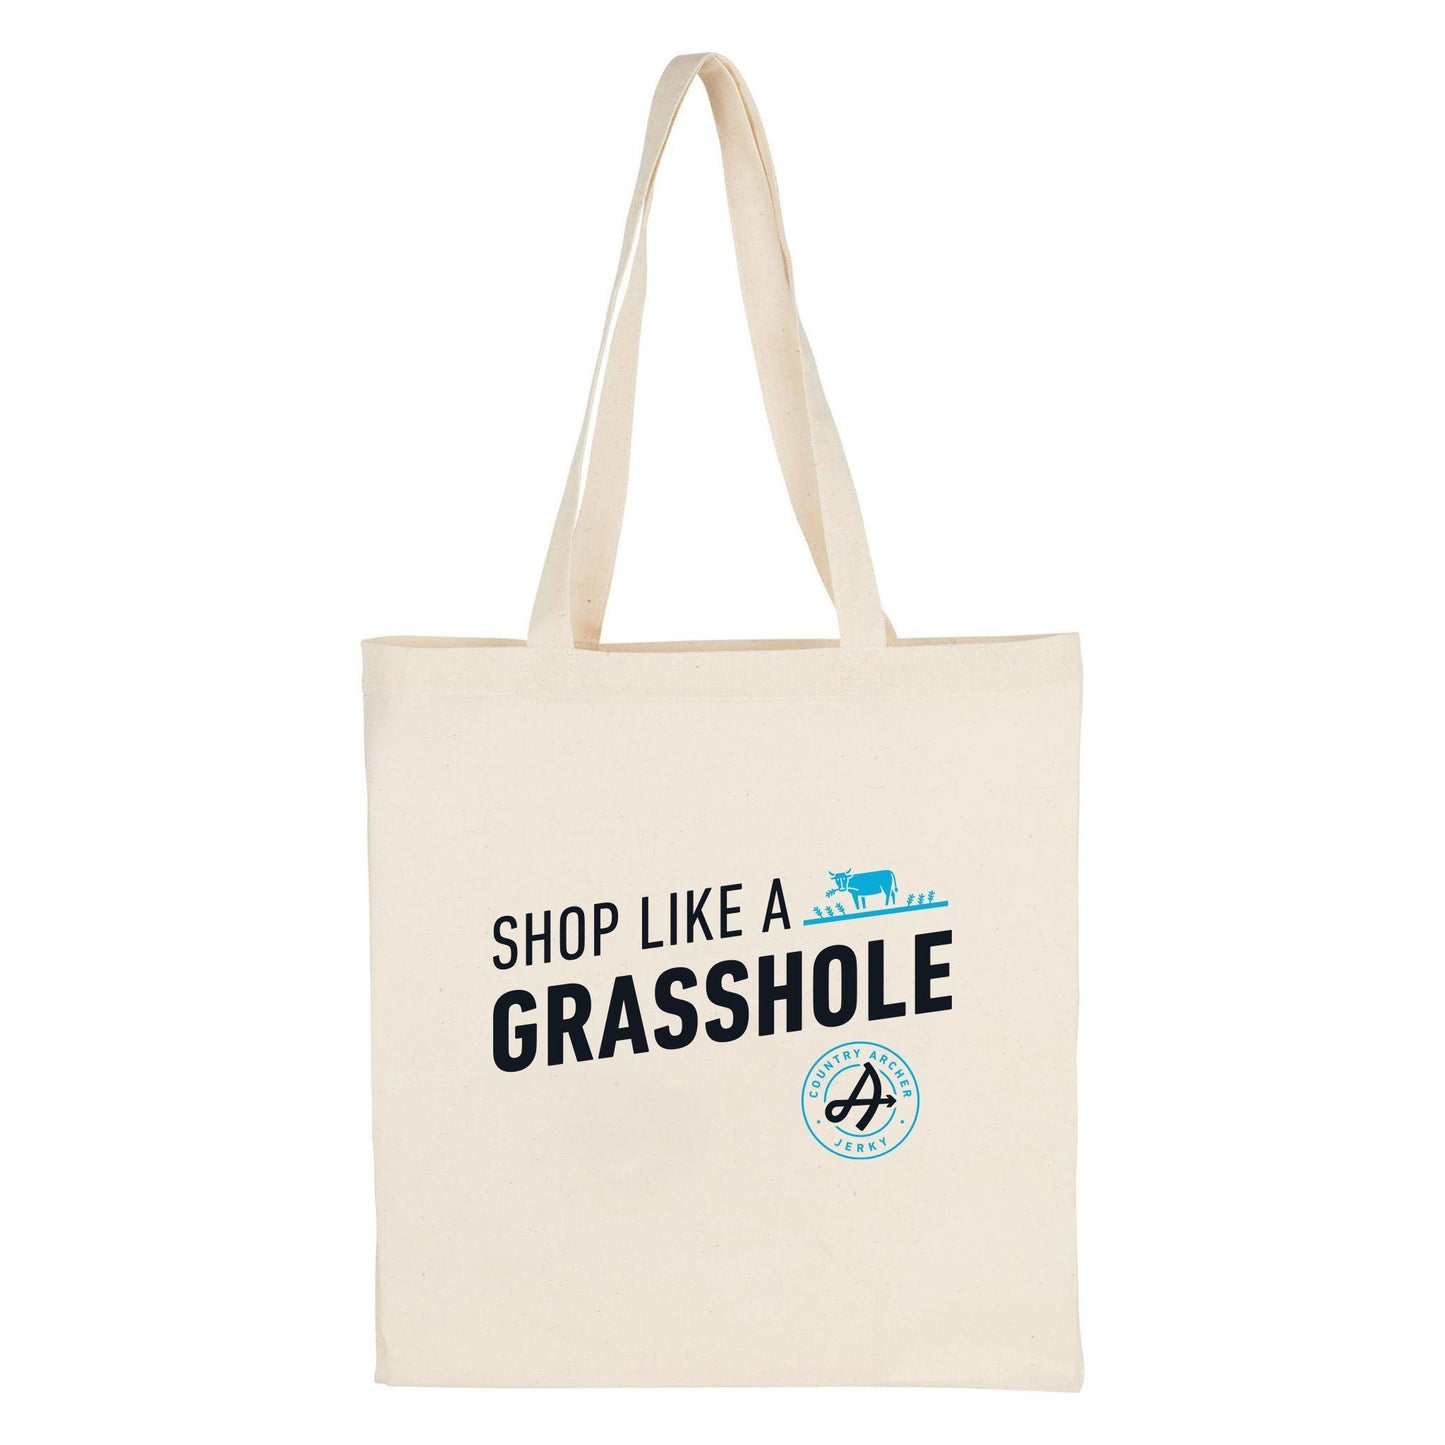  Shop Like A Grasshole Tote by Country Archer, Shop Like A Grasshole Tote, gi, shop-like-a-grasshole-tote, , White Tote